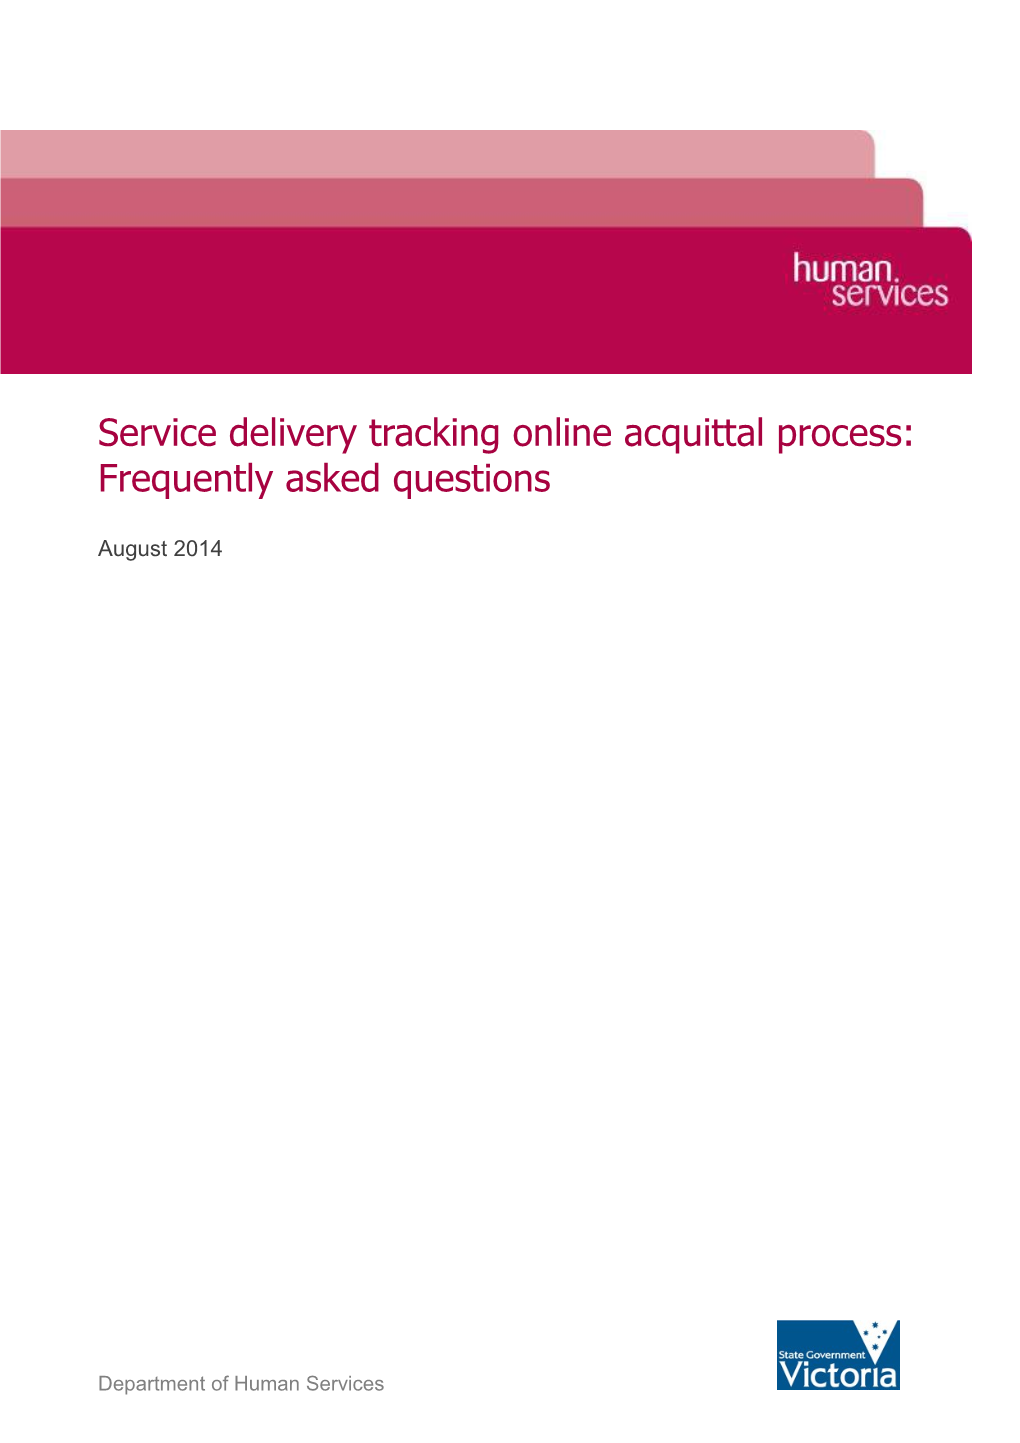 Service Delivery Tracking Online Acquittal Process: Frequently Asked Questions